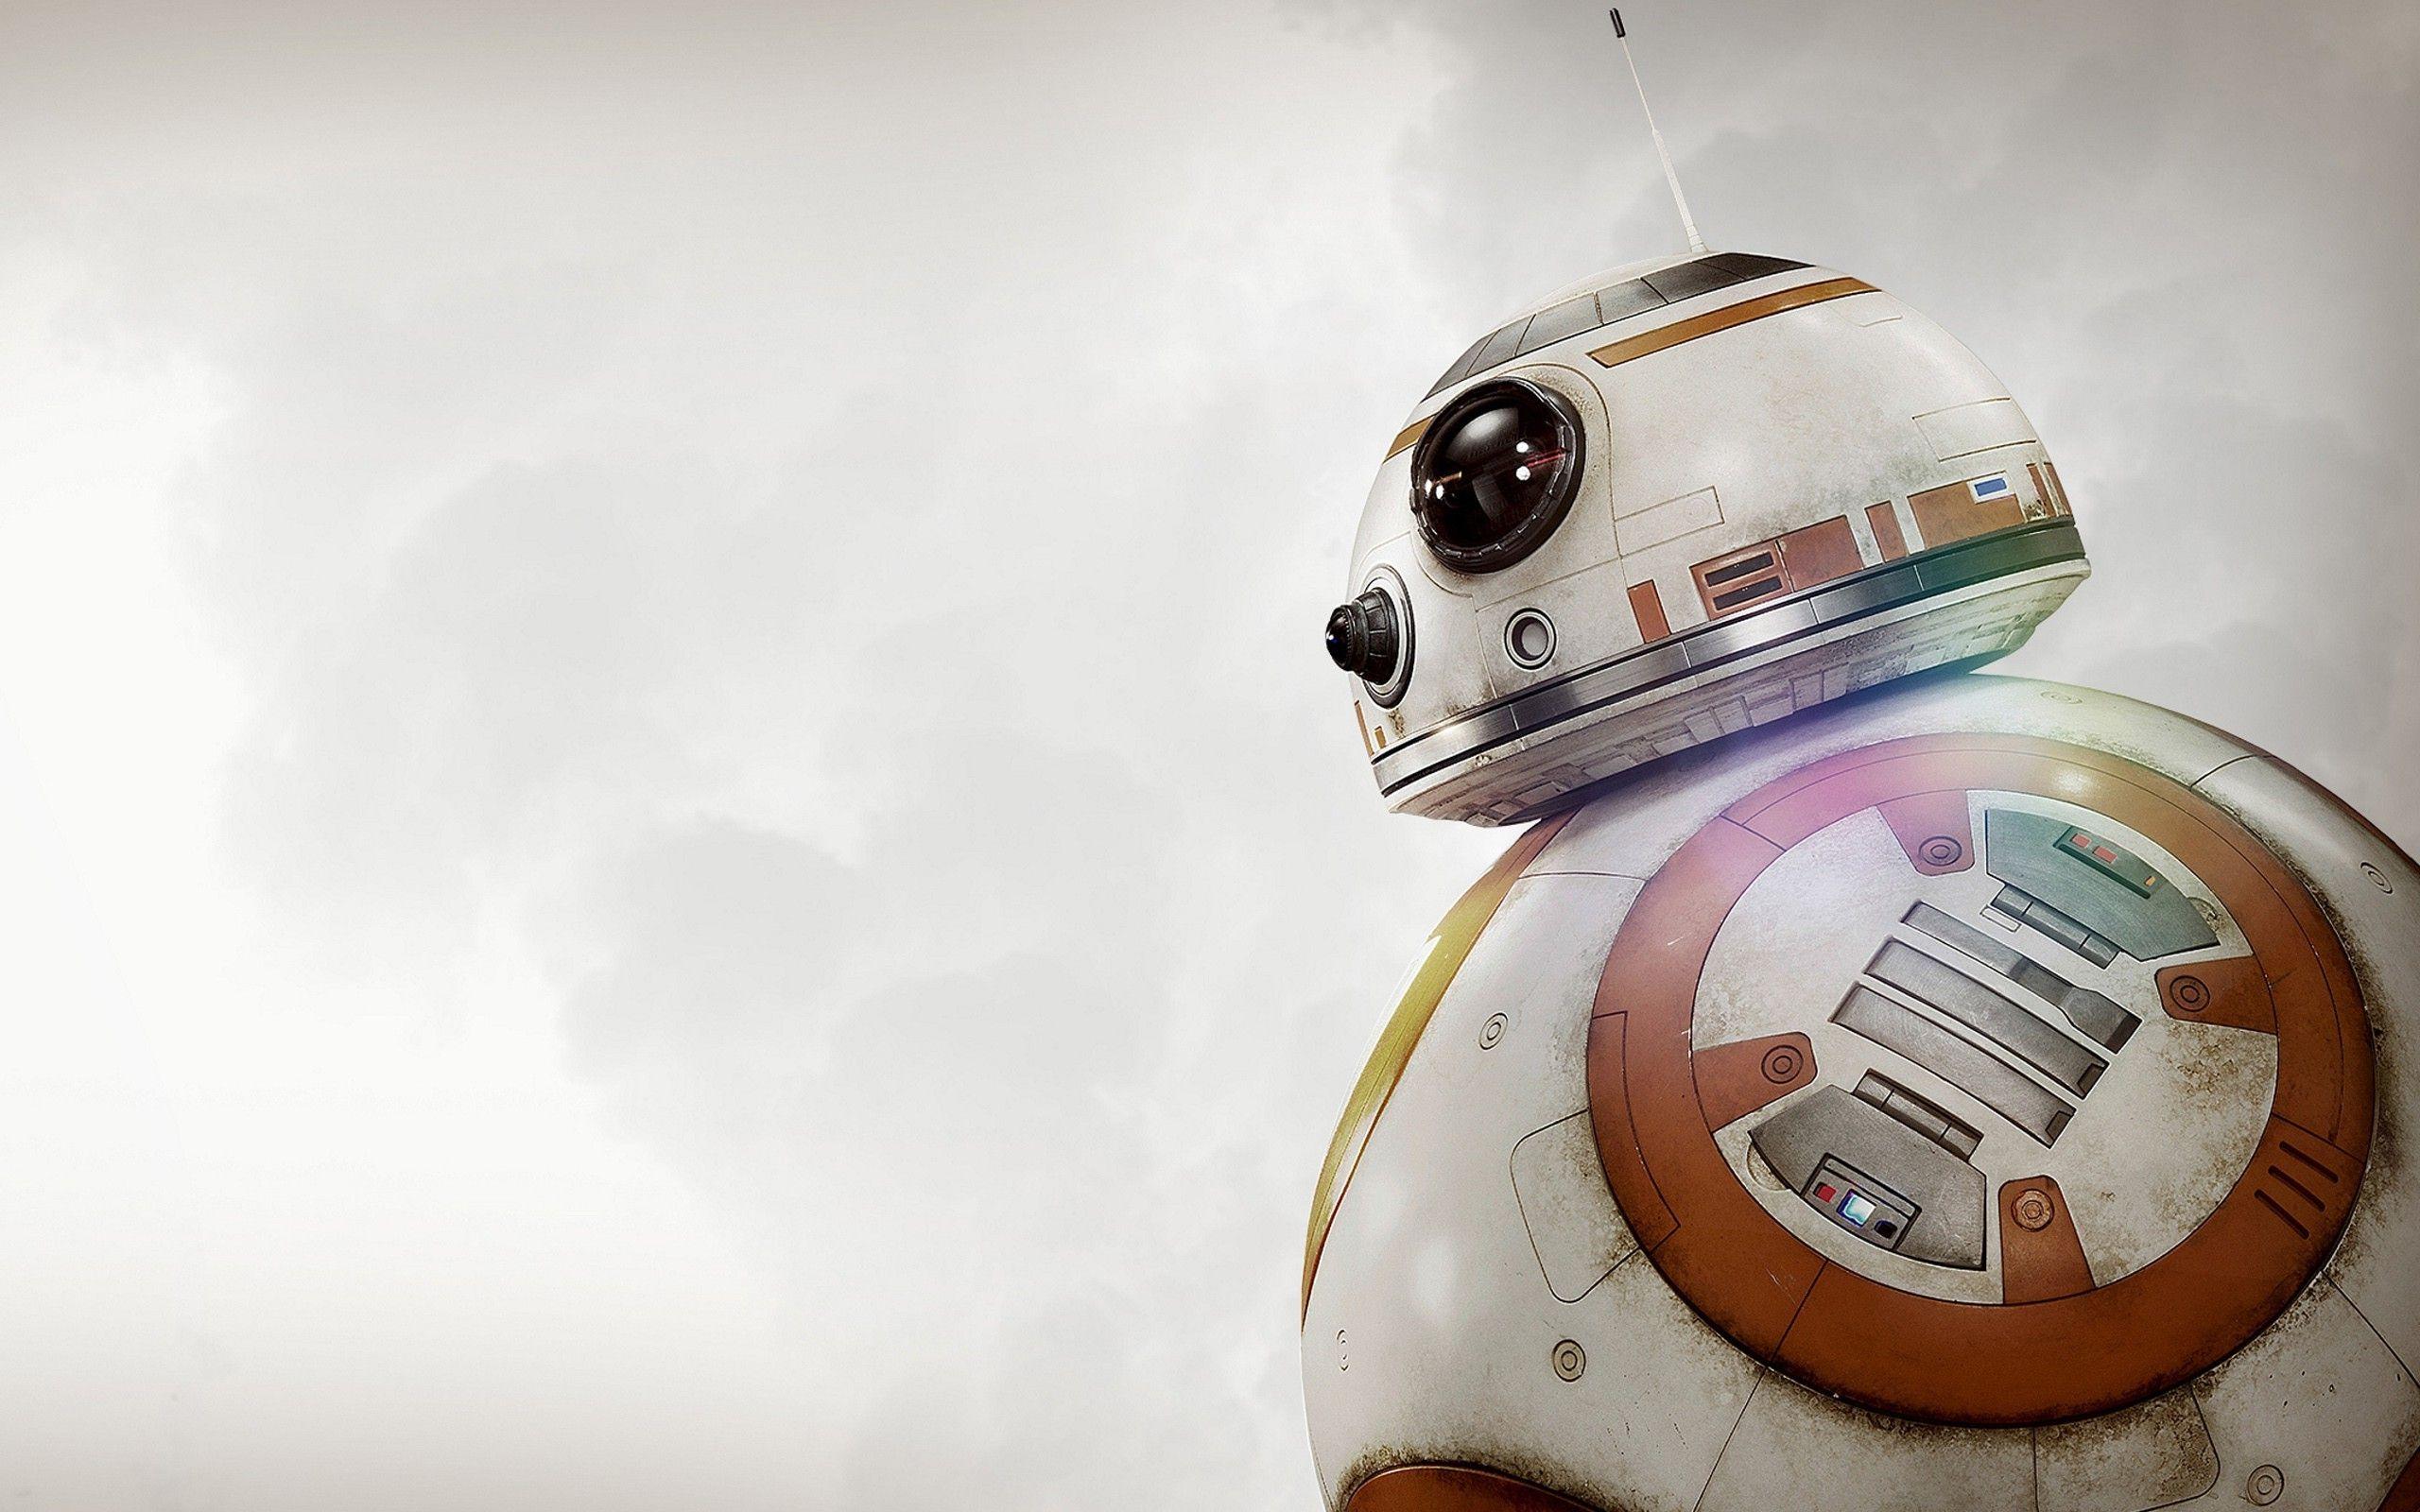 Wallpaper, white, Star Wars, robot, vehicle, photography, science fiction, Star Wars The Force Awakens, BB light, color, lighting, image, 2560x1600 px, close up 2560x1600